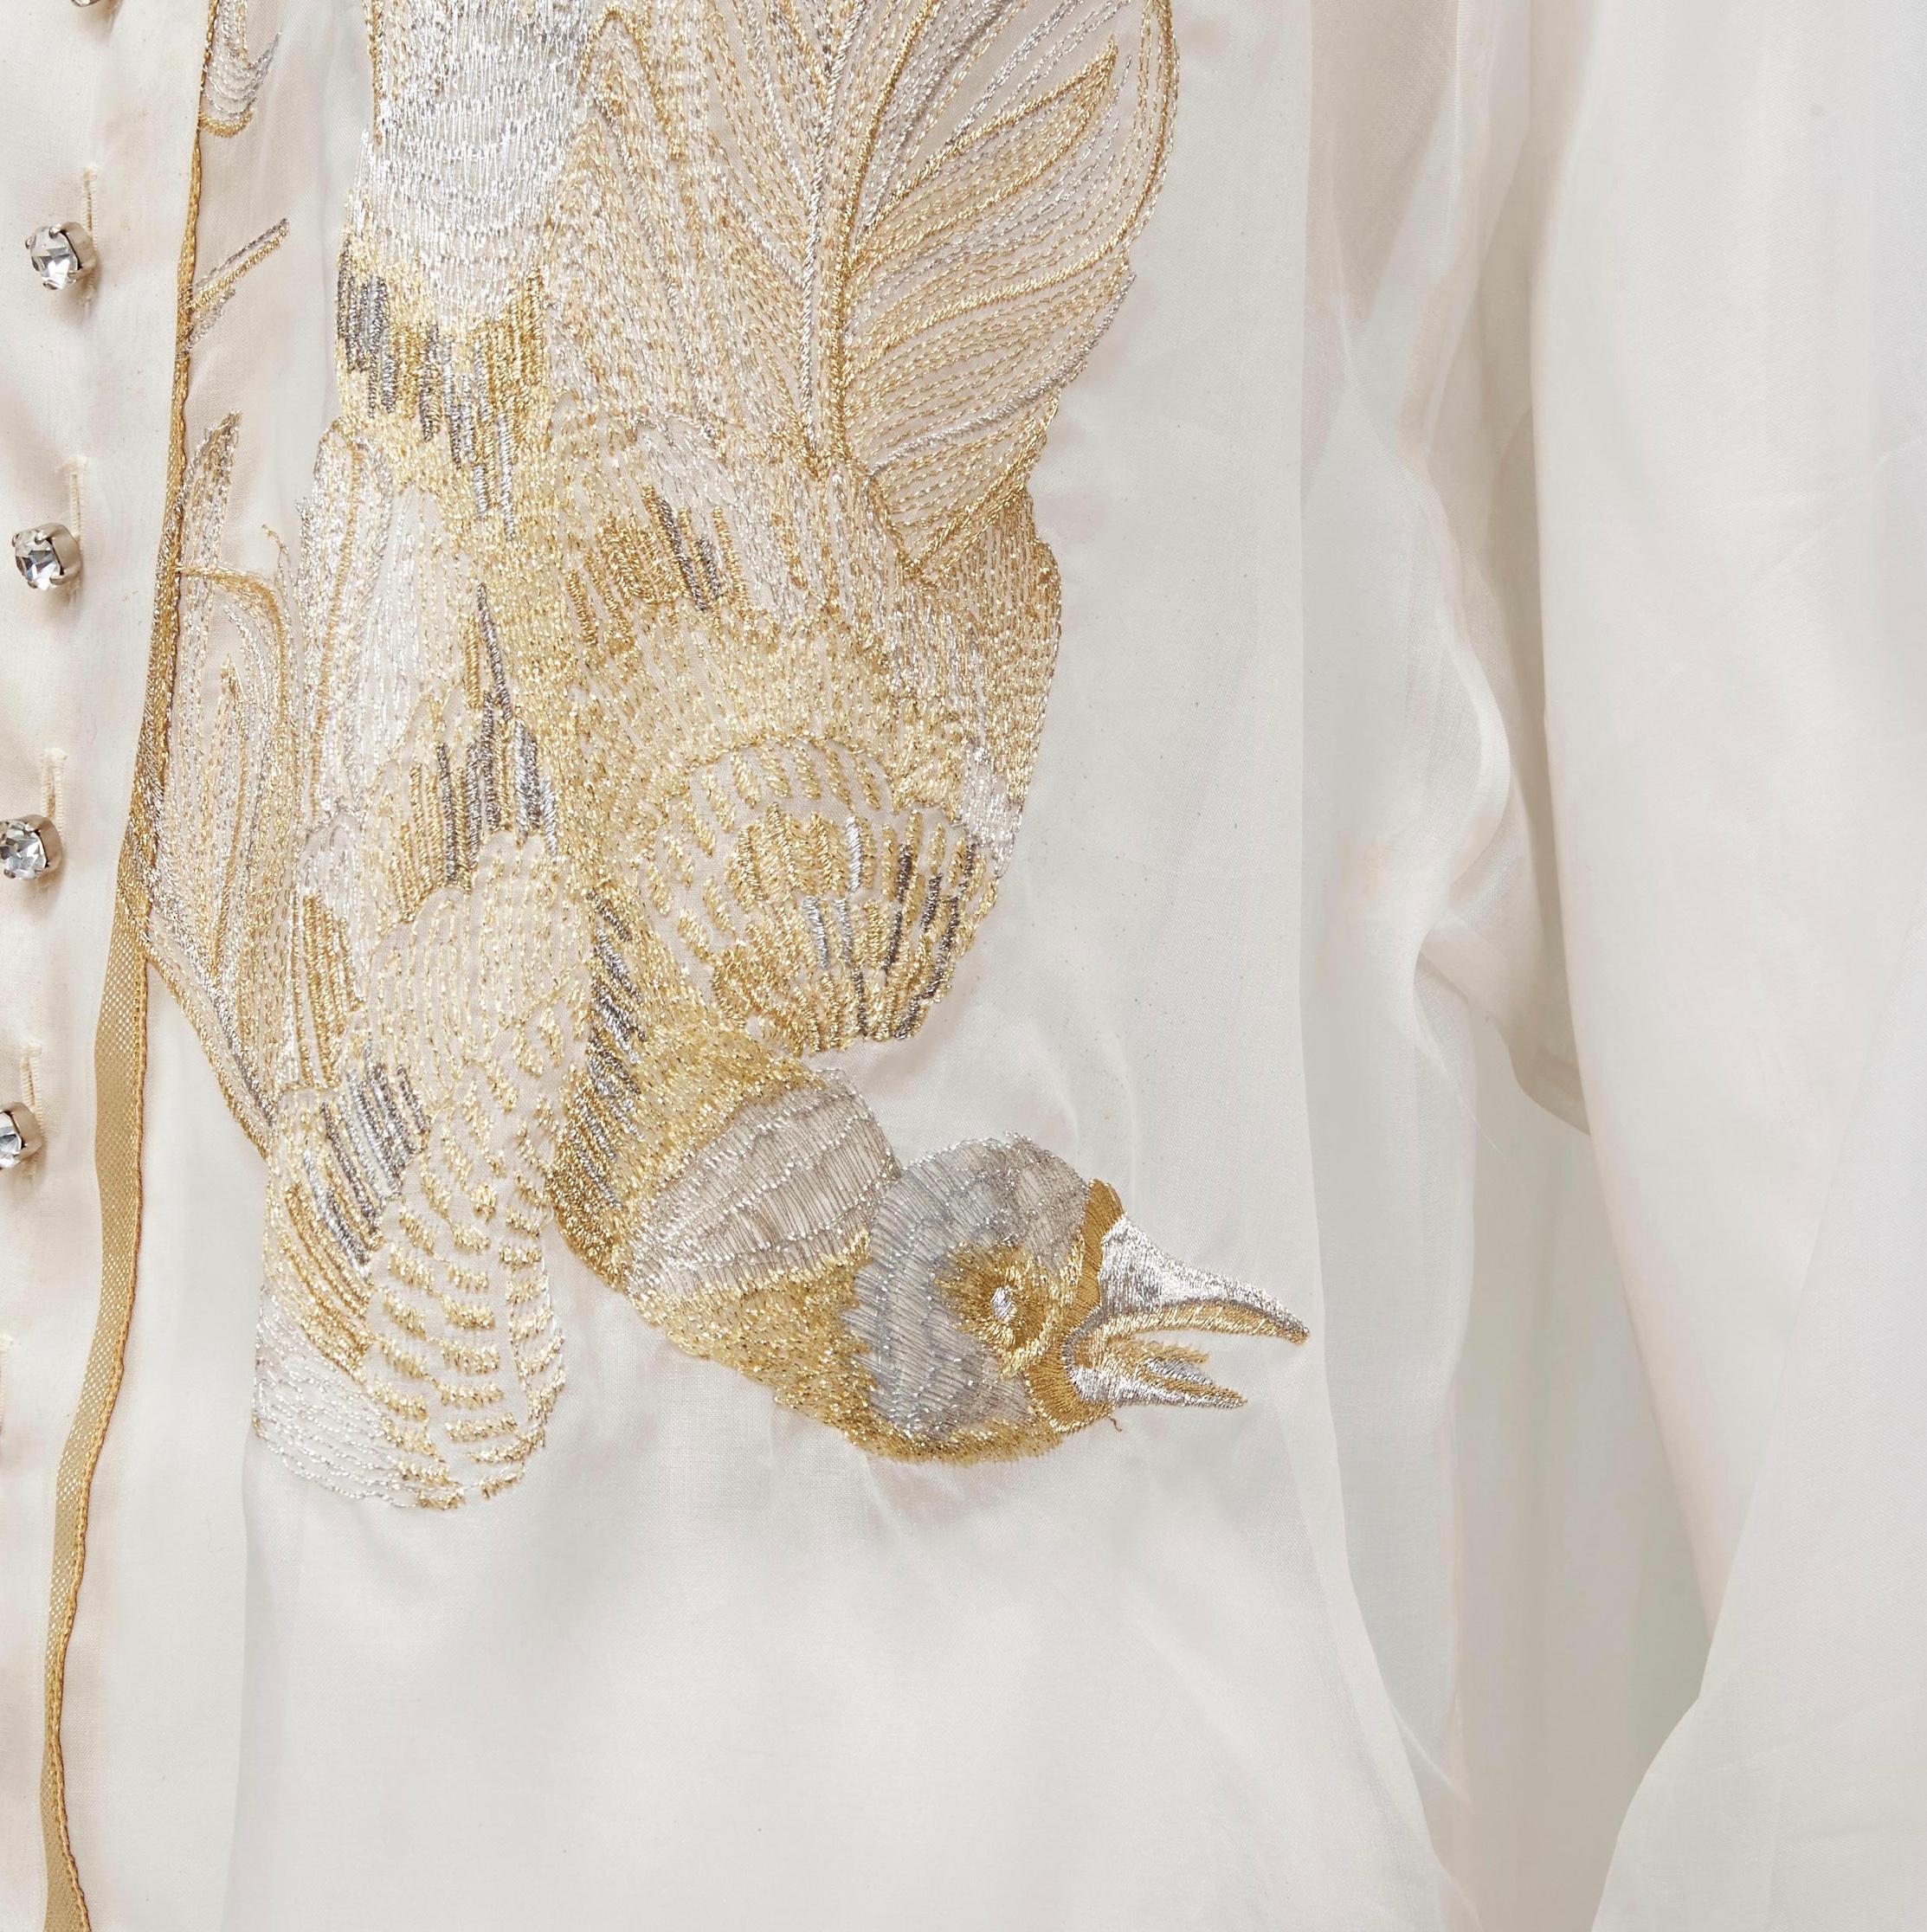 CHRISTIAN DIOR Gianfranco Ferre white sheer gold phoenix embroidery silk shirt FR38 M
Reference: TGAS/C01696
Brand: Christian Dior
Designer: Gianfranco Ferre
Material: Silk
Color: White, Gold
Pattern: Animal Print
Closure: Button
Extra Details: